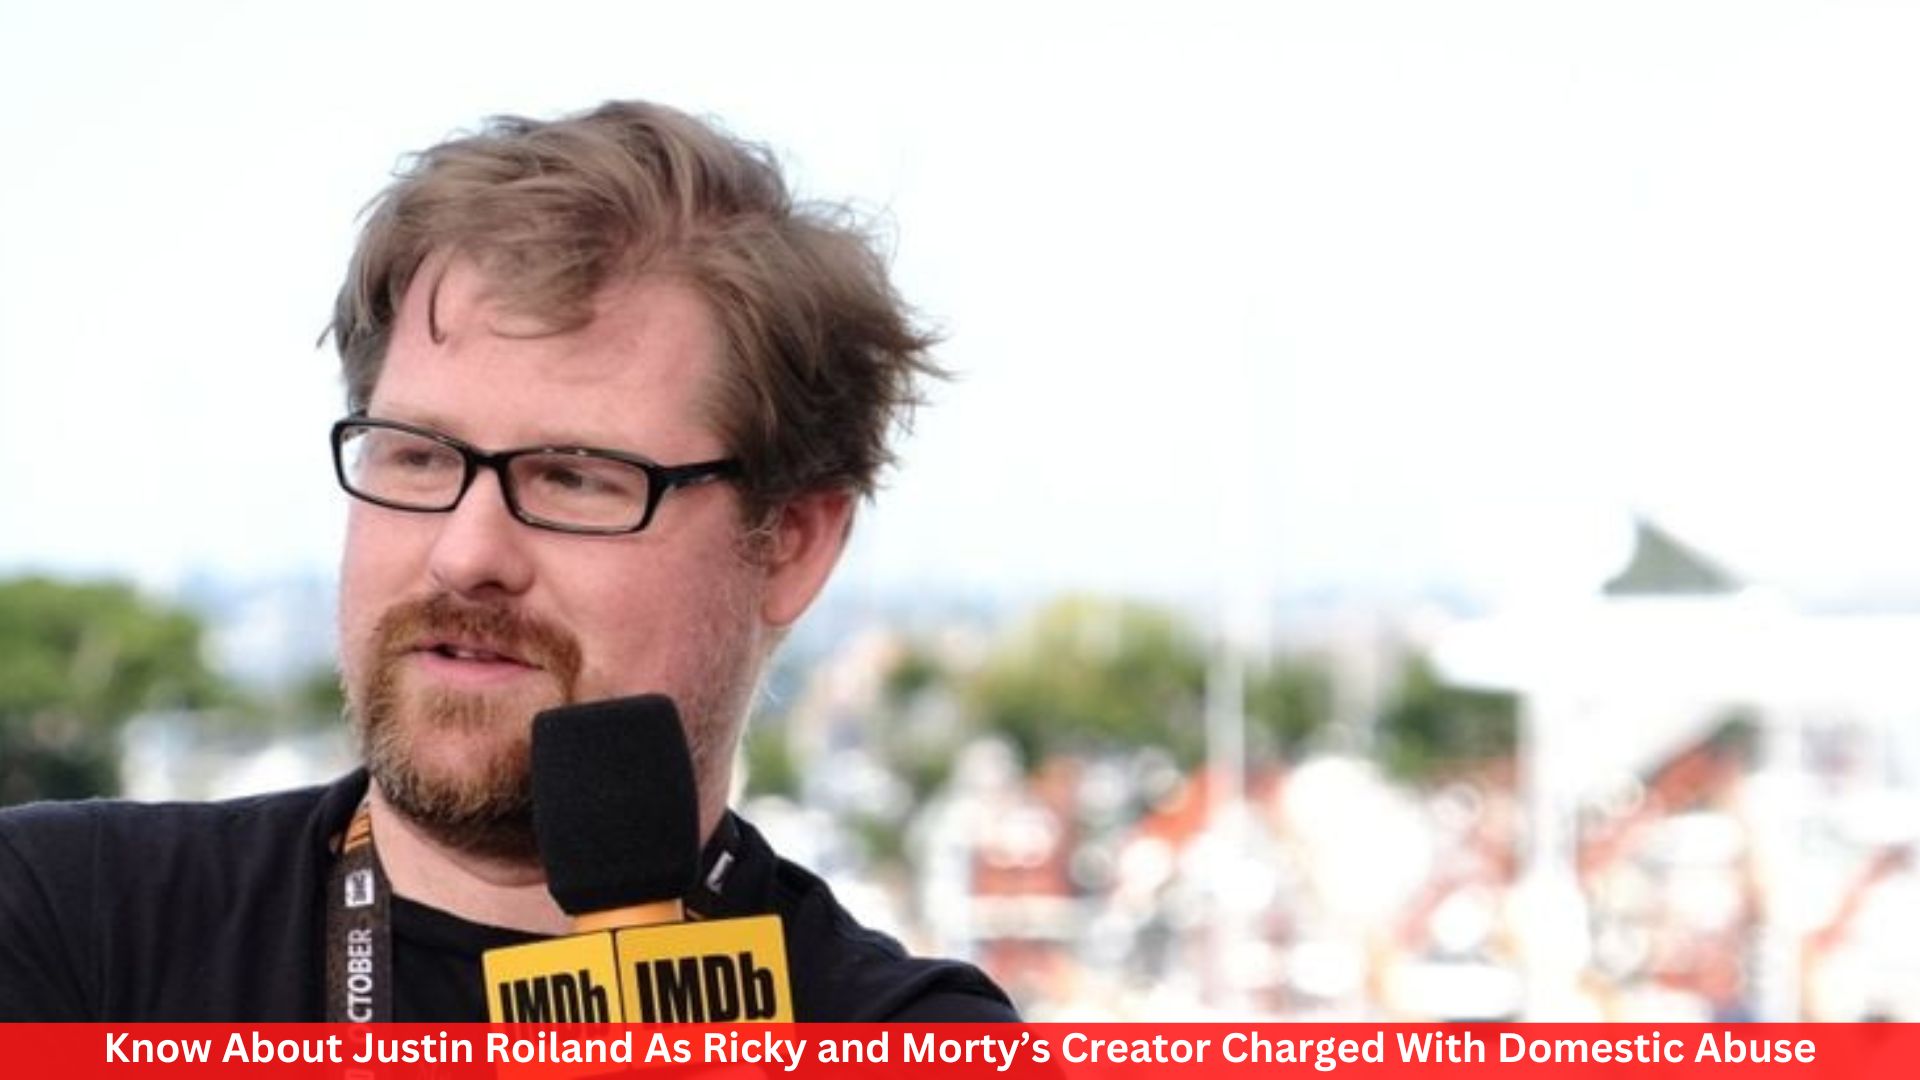 Know About Justin Roiland As Ricky and Morty’s Creator Charged With Domestic Abuse